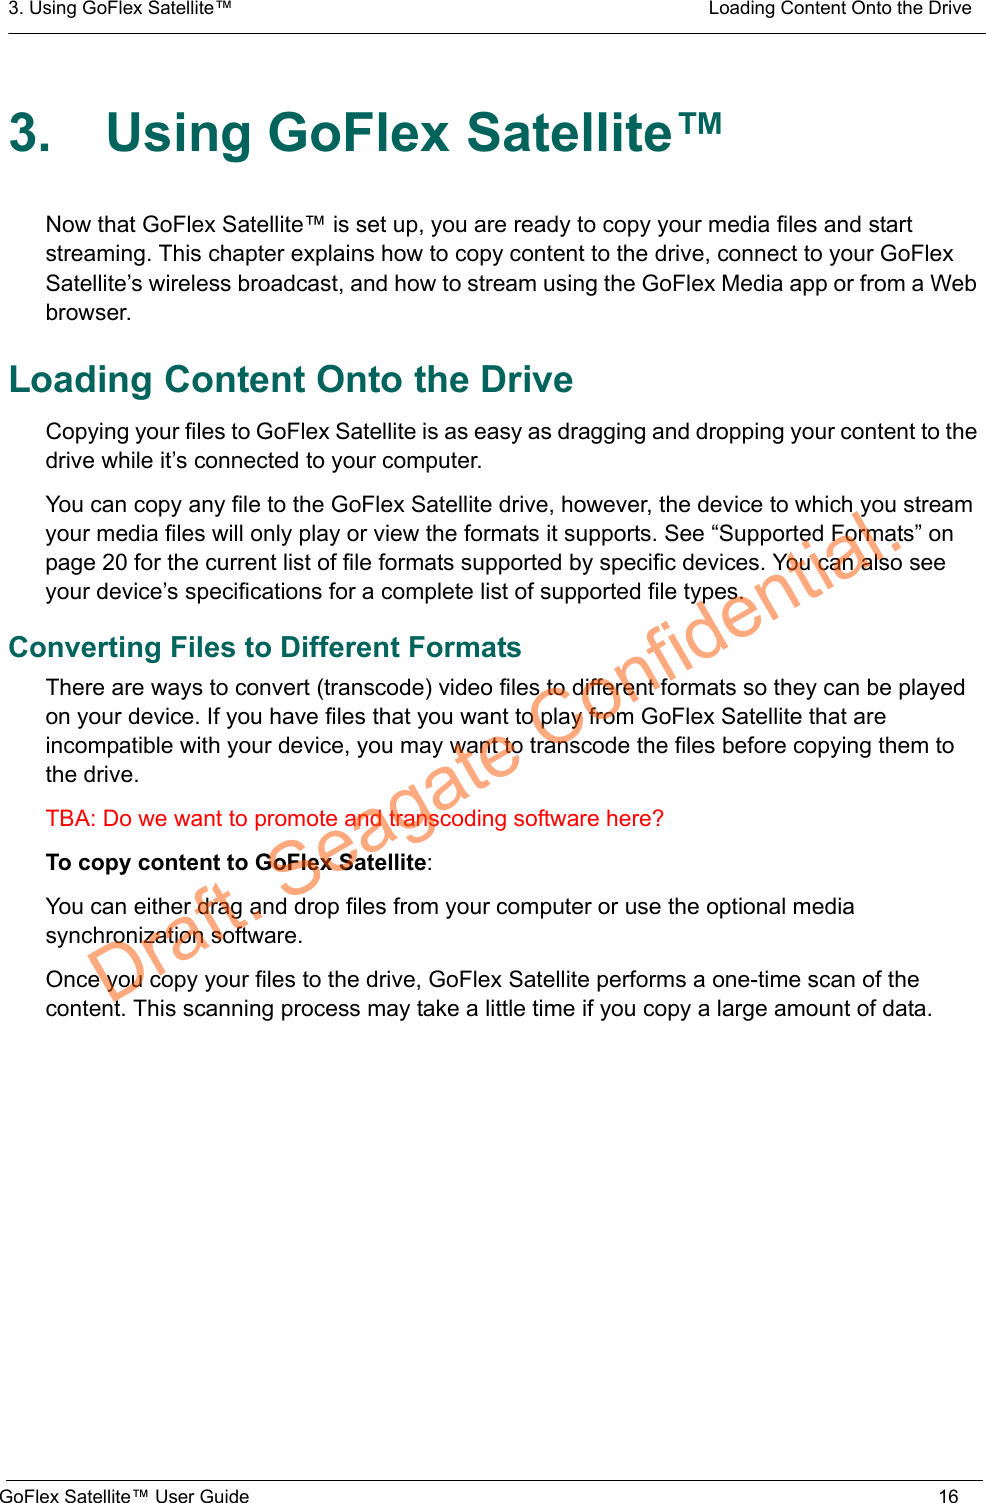 3. Using GoFlex Satellite™  Loading Content Onto the DriveGoFlex Satellite™ User Guide 163. Using GoFlex Satellite™Now that GoFlex Satellite™ is set up, you are ready to copy your media files and start streaming. This chapter explains how to copy content to the drive, connect to your GoFlex Satellite’s wireless broadcast, and how to stream using the GoFlex Media app or from a Web browser.Loading Content Onto the DriveCopying your files to GoFlex Satellite is as easy as dragging and dropping your content to the drive while it’s connected to your computer.You can copy any file to the GoFlex Satellite drive, however, the device to which you stream your media files will only play or view the formats it supports. See “Supported Formats” on page 20 for the current list of file formats supported by specific devices. You can also see your device’s specifications for a complete list of supported file types.Converting Files to Different FormatsThere are ways to convert (transcode) video files to different formats so they can be played on your device. If you have files that you want to play from GoFlex Satellite that are incompatible with your device, you may want to transcode the files before copying them to the drive.TBA: Do we want to promote and transcoding software here?To copy content to GoFlex Satellite:You can either drag and drop files from your computer or use the optional media synchronization software.Once you copy your files to the drive, GoFlex Satellite performs a one-time scan of the content. This scanning process may take a little time if you copy a large amount of data.Draft. Seagate Confidential.